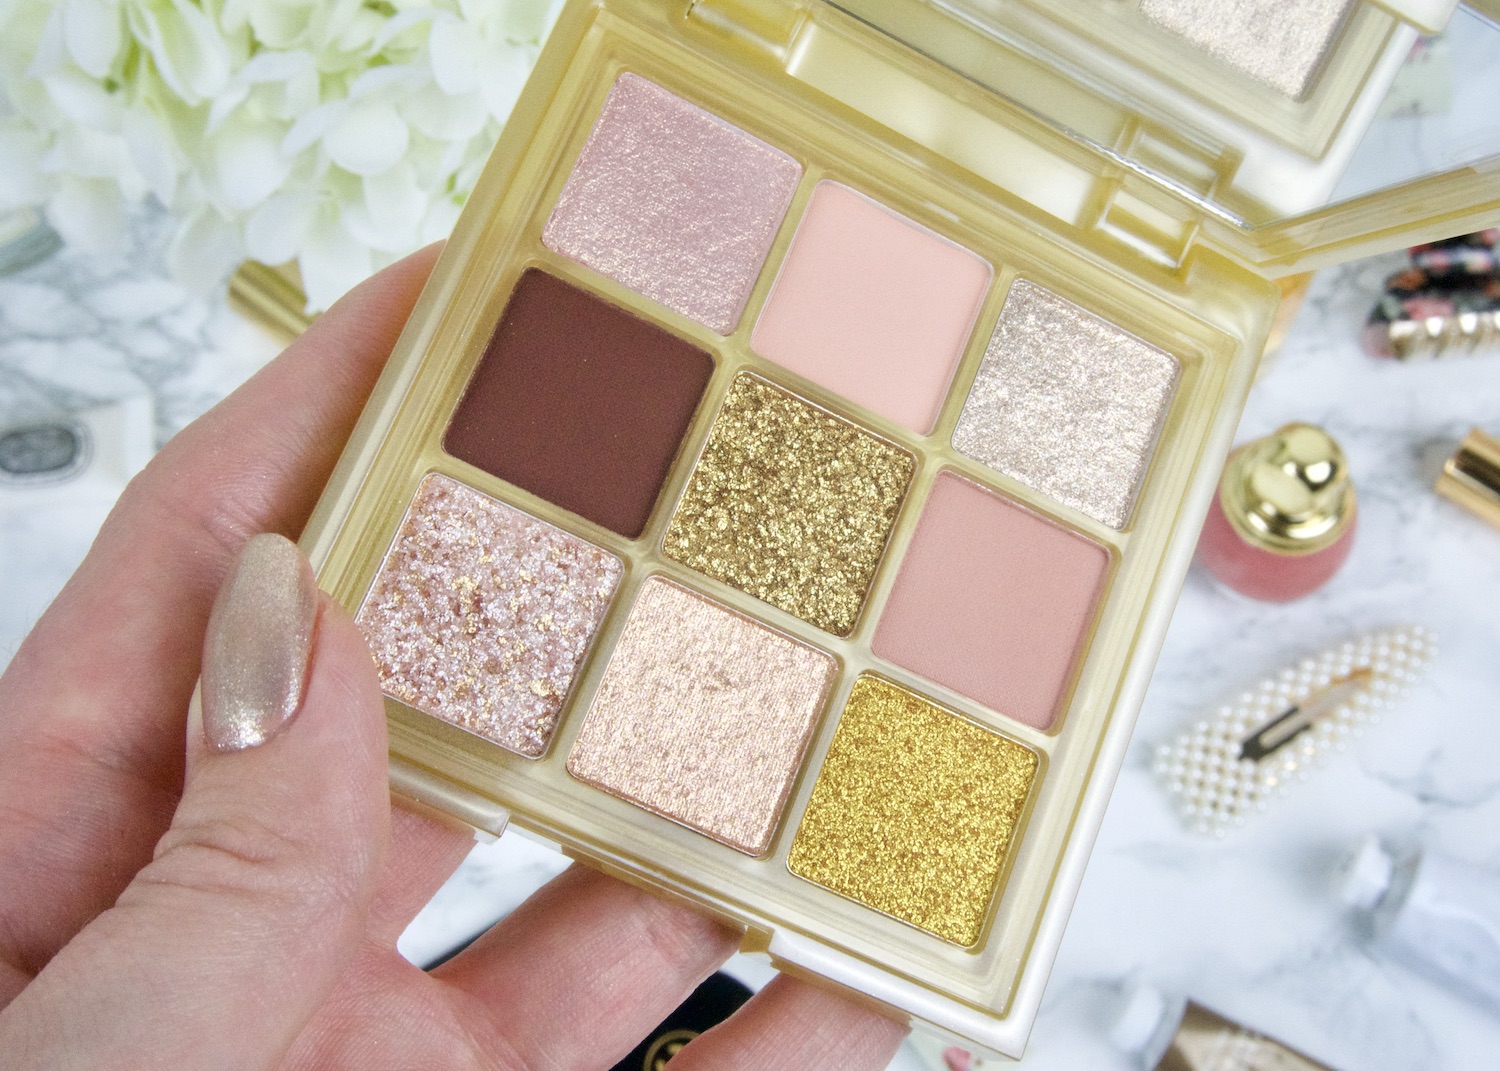 Huda Beauty Gold Obsessions Palette productfoto dichtbij